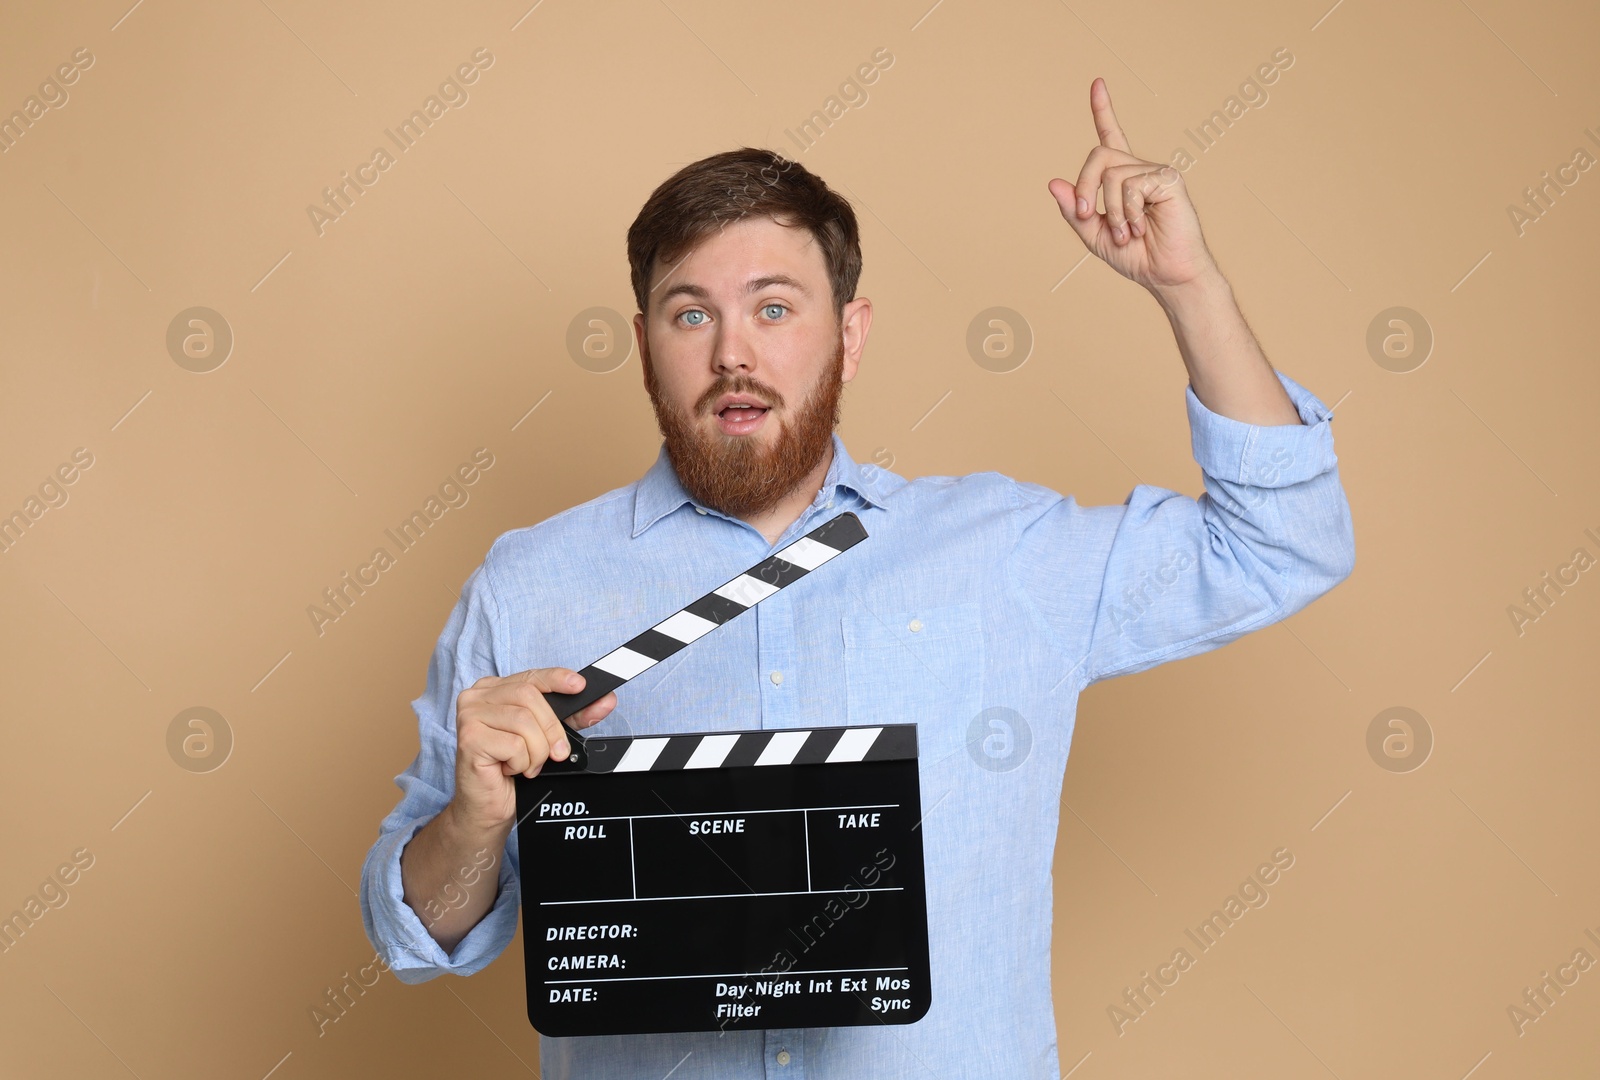 Photo of Making movie. Man with clapperboard pointing at something on beige background